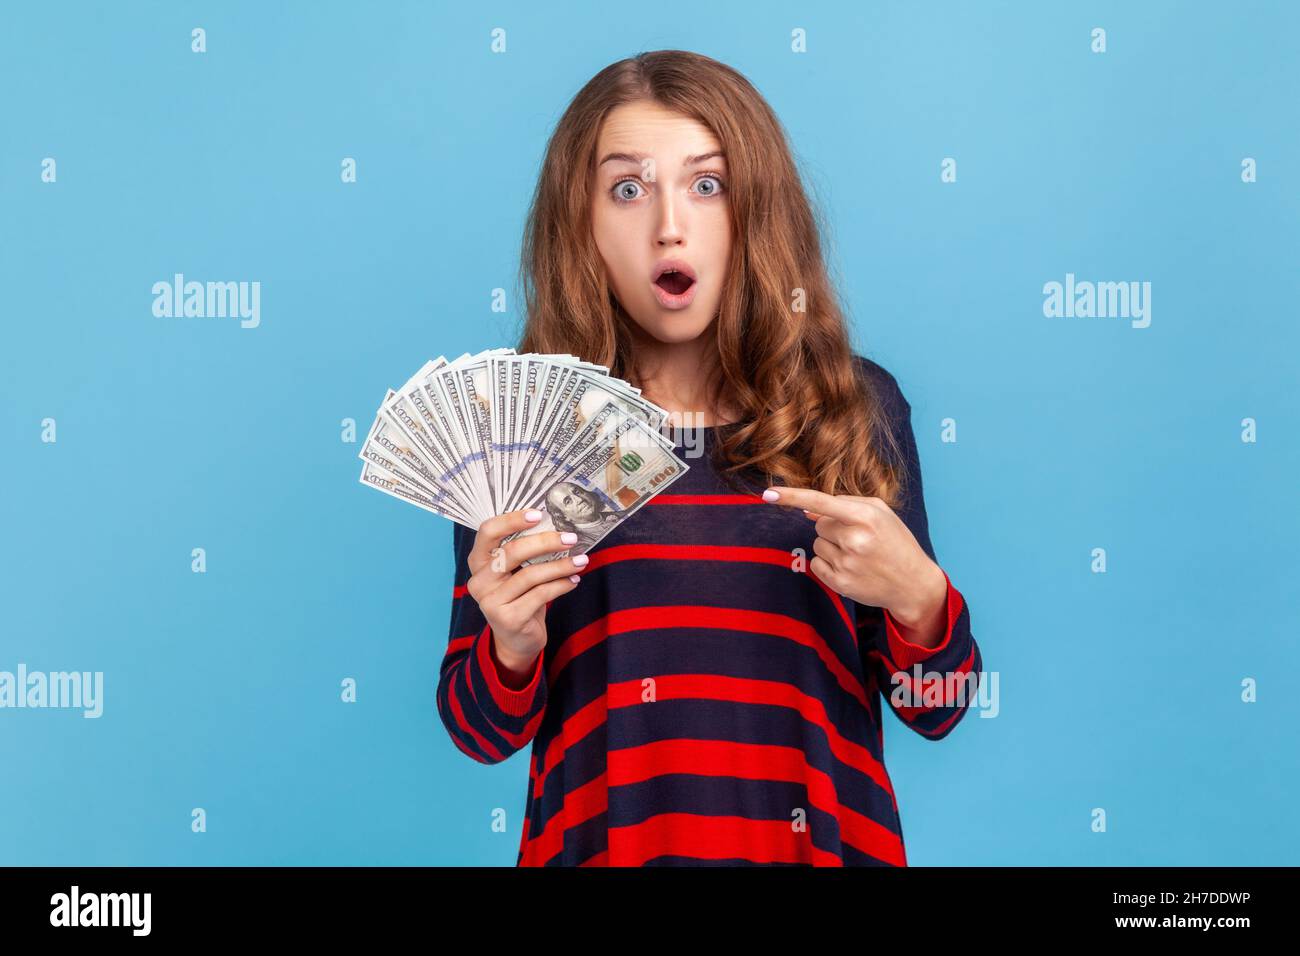 Shocked woman wearing striped casual style sweater, pointing at dollars banknotes in her hand, having astonished expression, big profit. Indoor studio shot isolated on blue background. Stock Photo